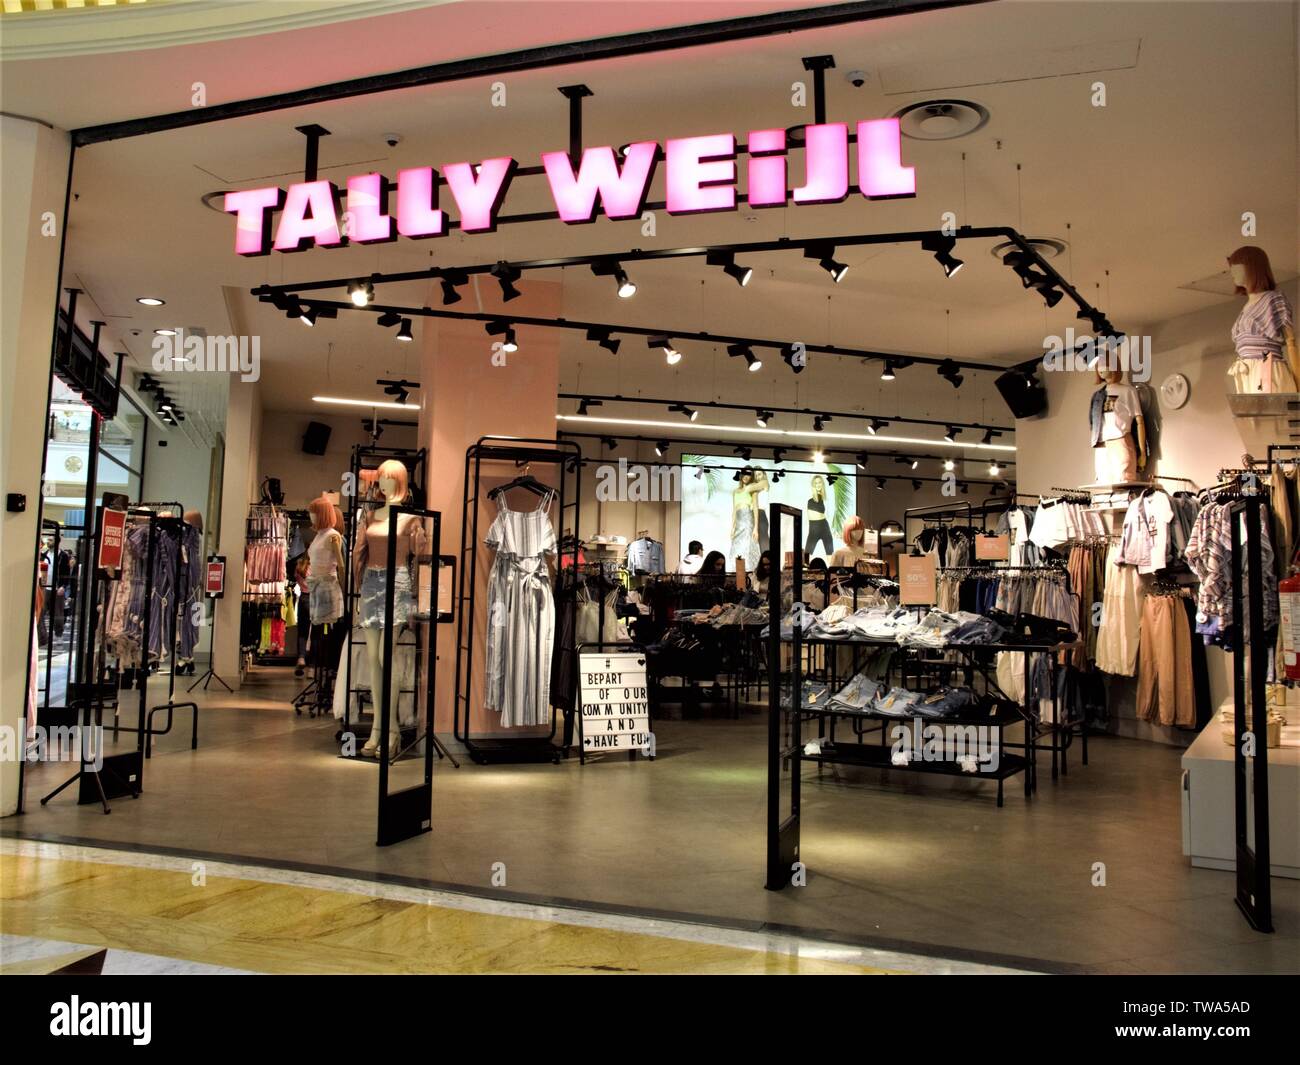 TALLY WEIJL FASHION STORE ENTRANCE IN EUROMA 2 SHOPPING CENTER IN ROME  Stock Photo - Alamy